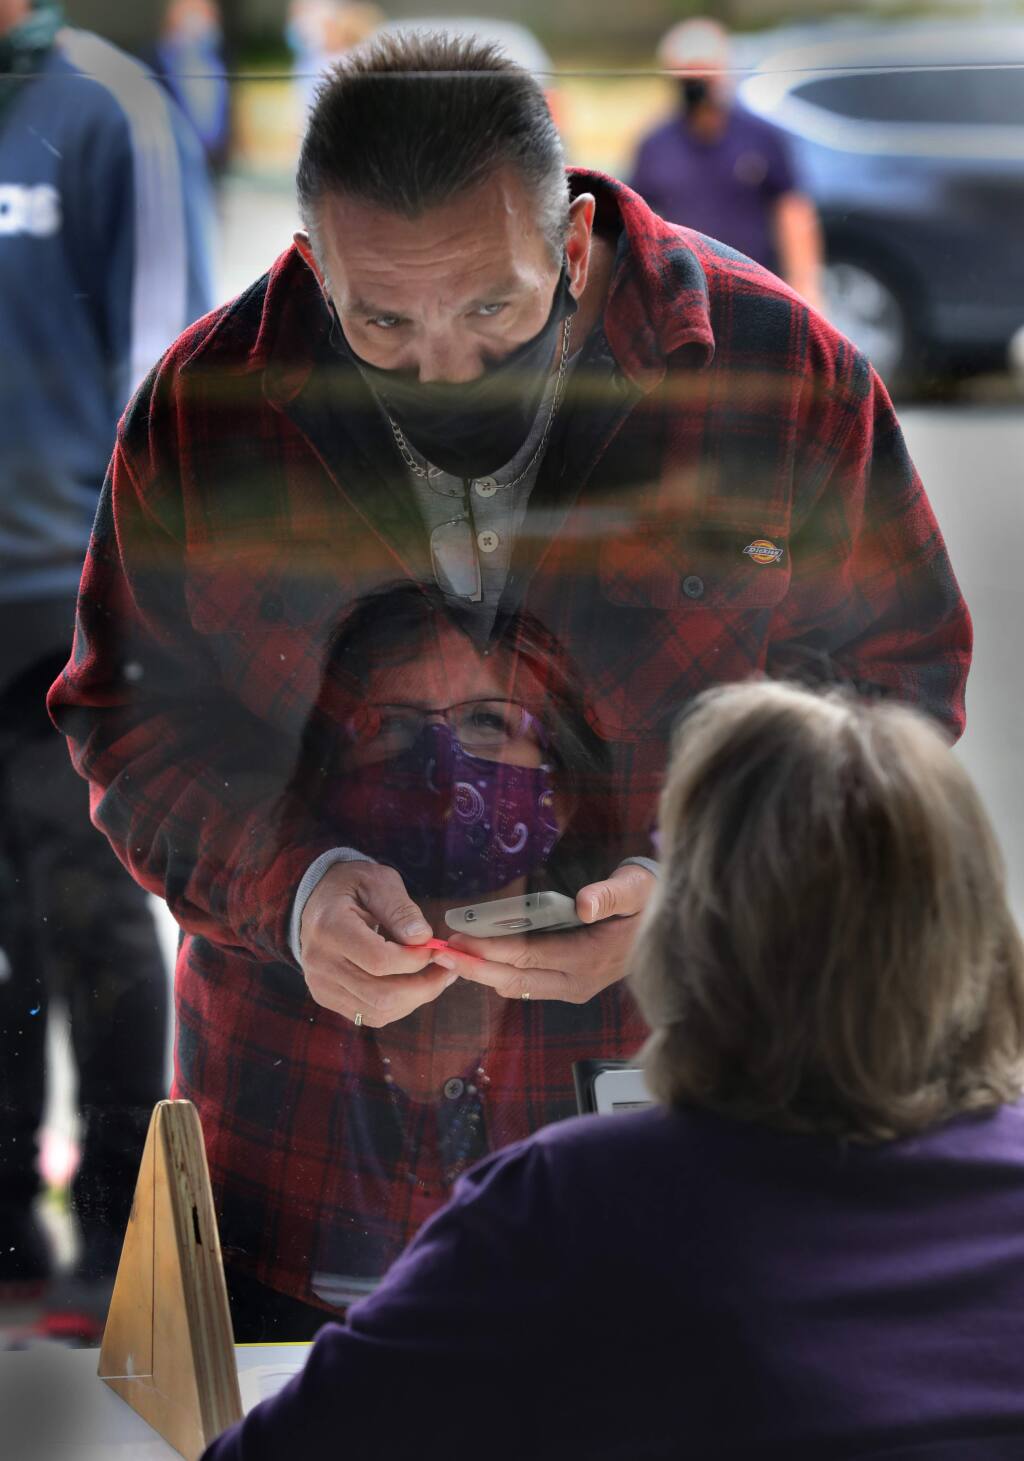 Robert Borders goes through the screening process for COVID-19 with Sonoma County Court worker Dawn P. outside the Sonoma County Superior Court in Santa Rosa, Calif., on Monday, June 1, 2020. (BETH SCHLANKER/ The Press Democrat)